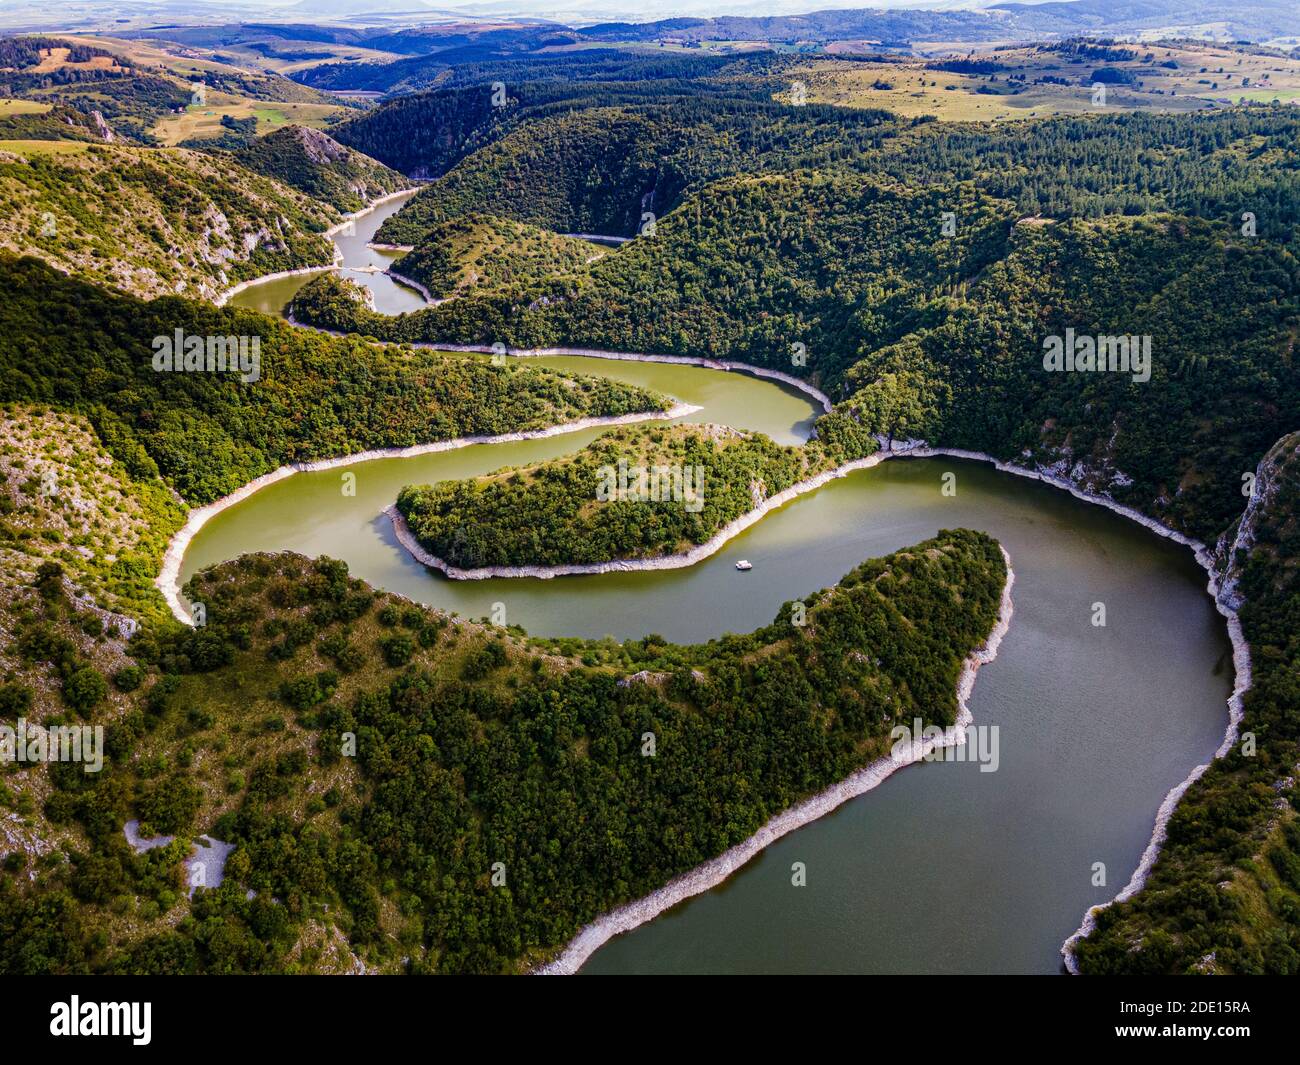 Uvac River meandering through the mountains, Uvac Special Nature Reserve, Serbia, Europe Stock Photo